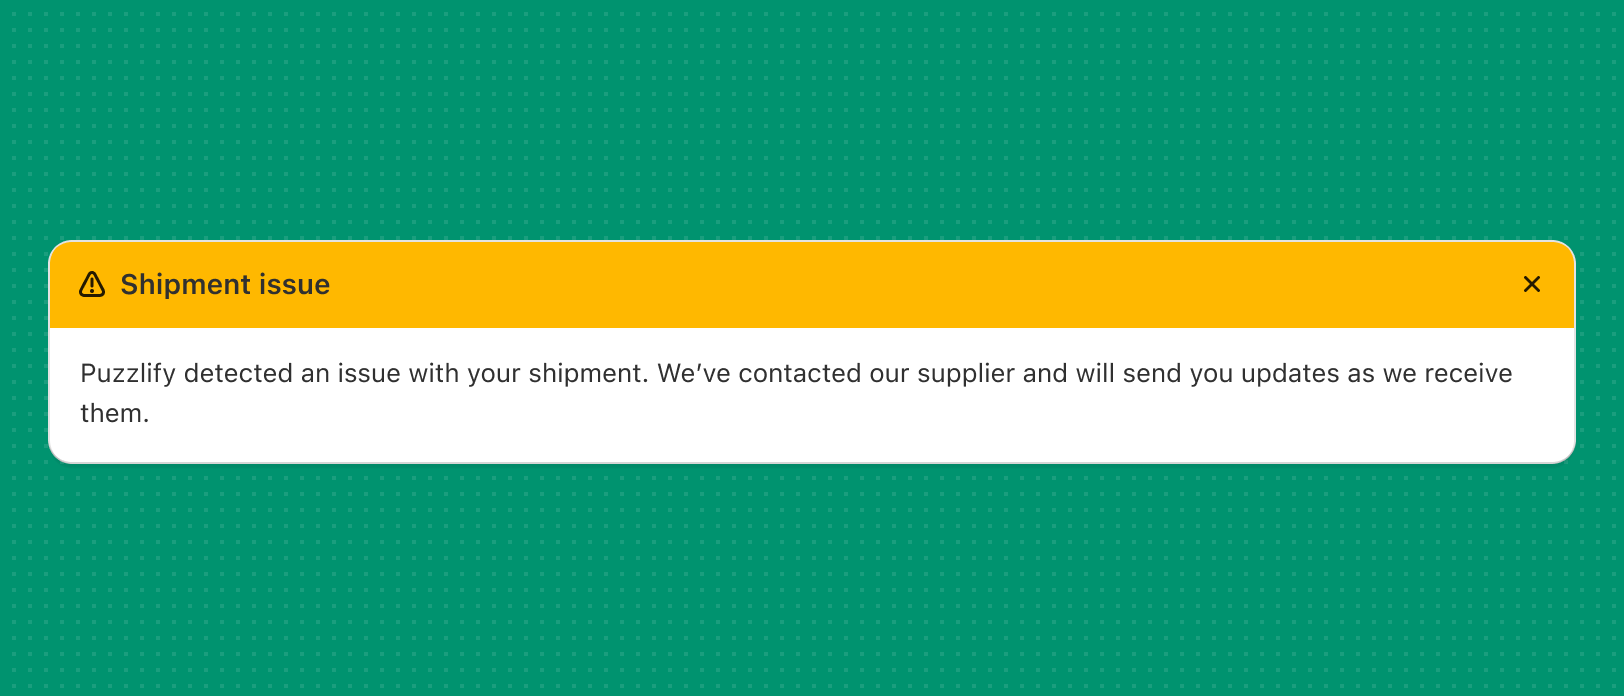 A message where Puzzlify refers to itself multiple times. The message says "Puzzlify detected an issue with your shipment". It then says "We’ve contacted our supplier and will send you updates as we receive them."